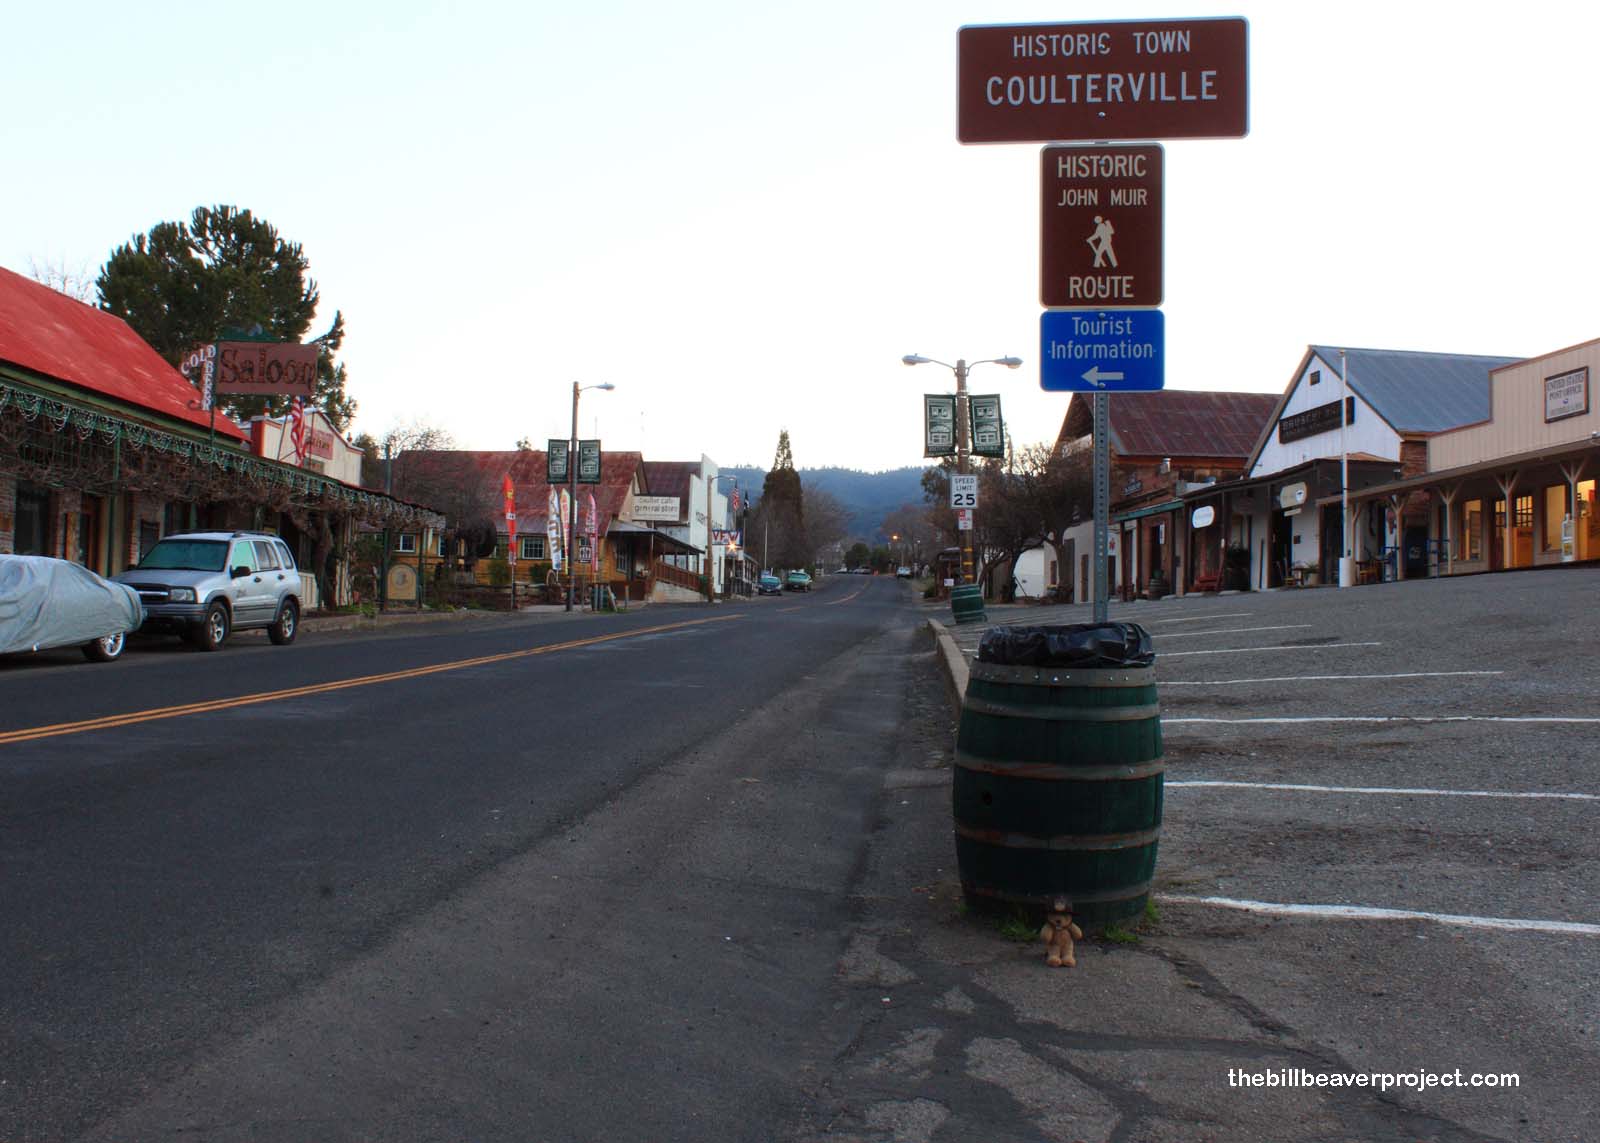 Coulterville